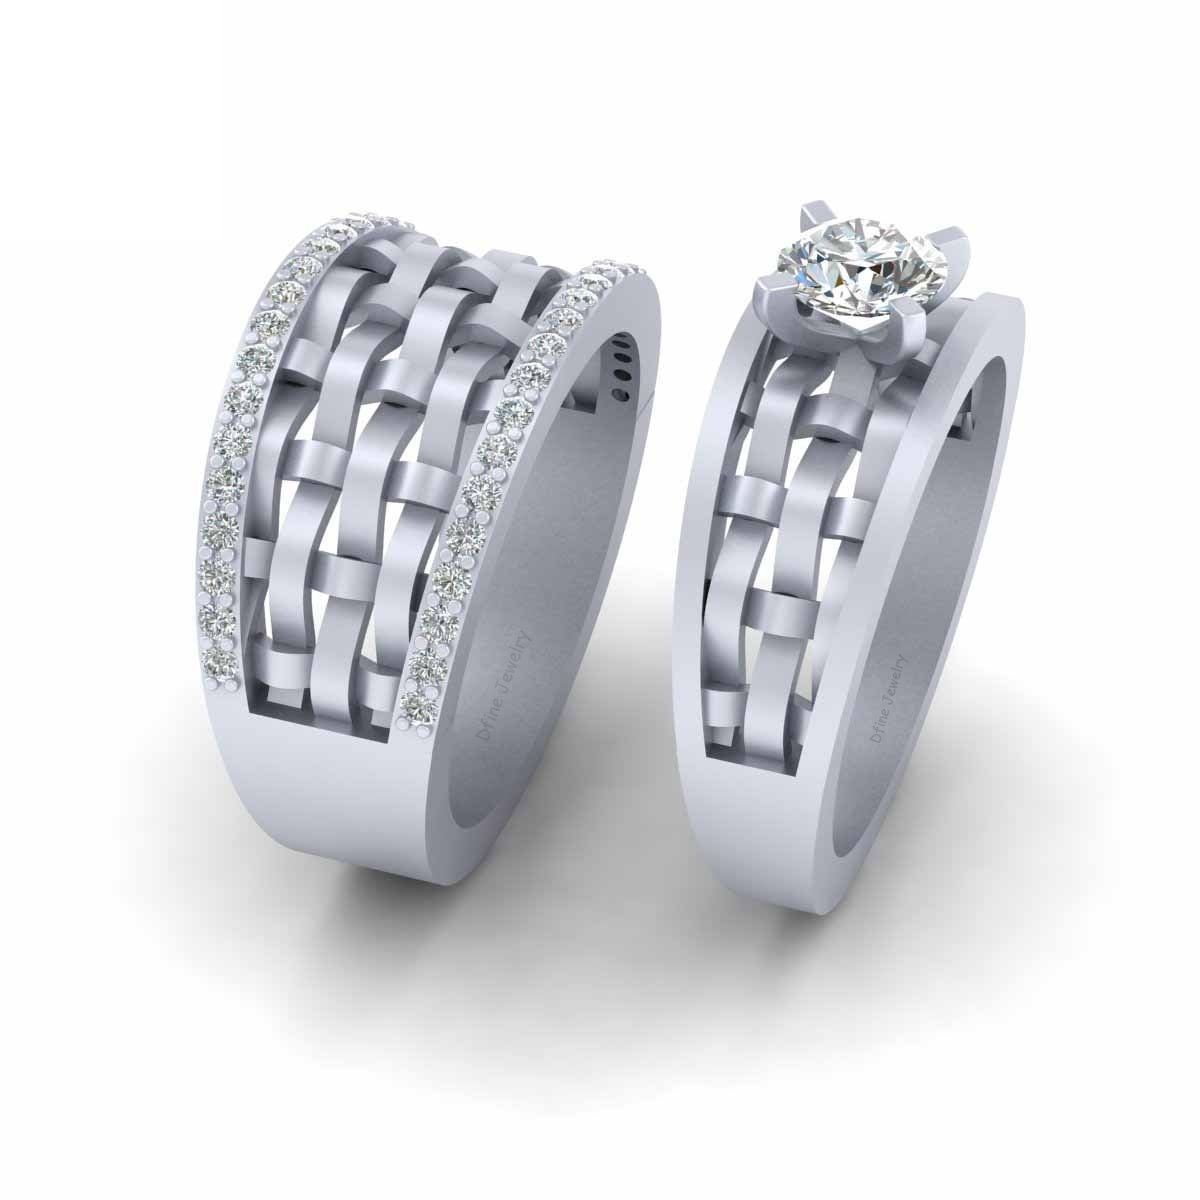 Mesh 2Pc Couple Set His and Her Wedding Band Set Promise Rings For Couples Rings - $3,599.99